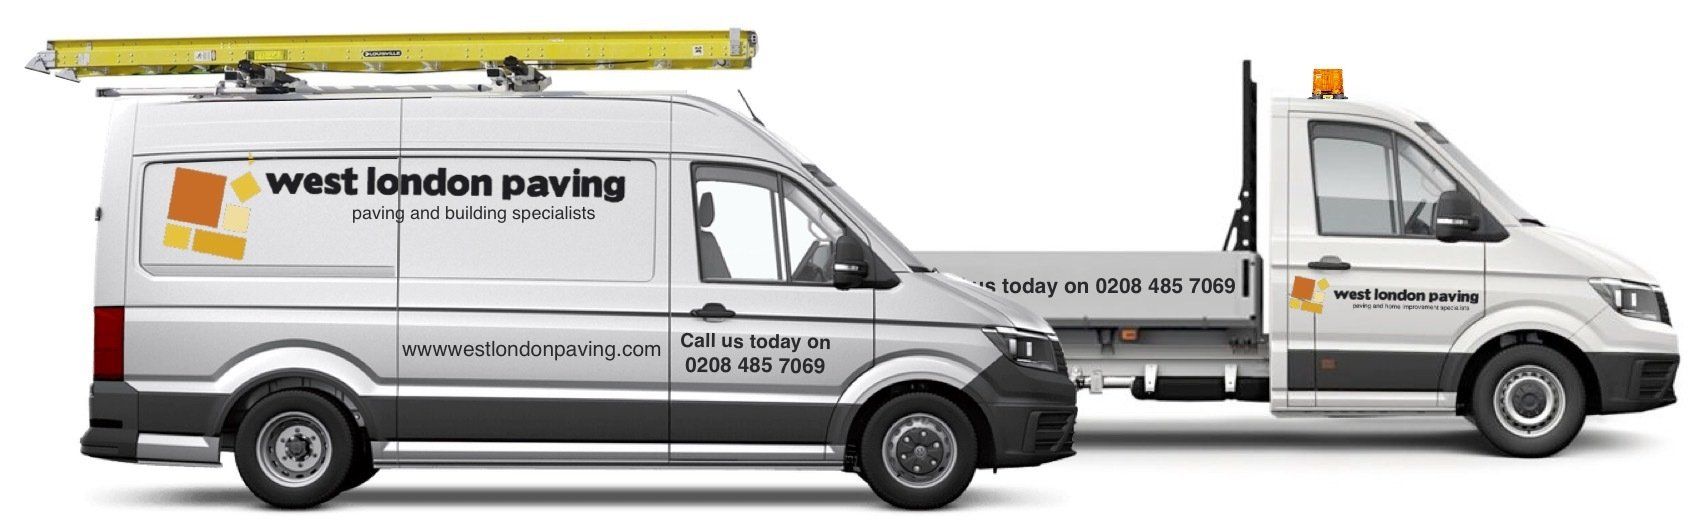 West London Paving Windsor are paving, building and roofing specialists working in Windsor and throughout west London